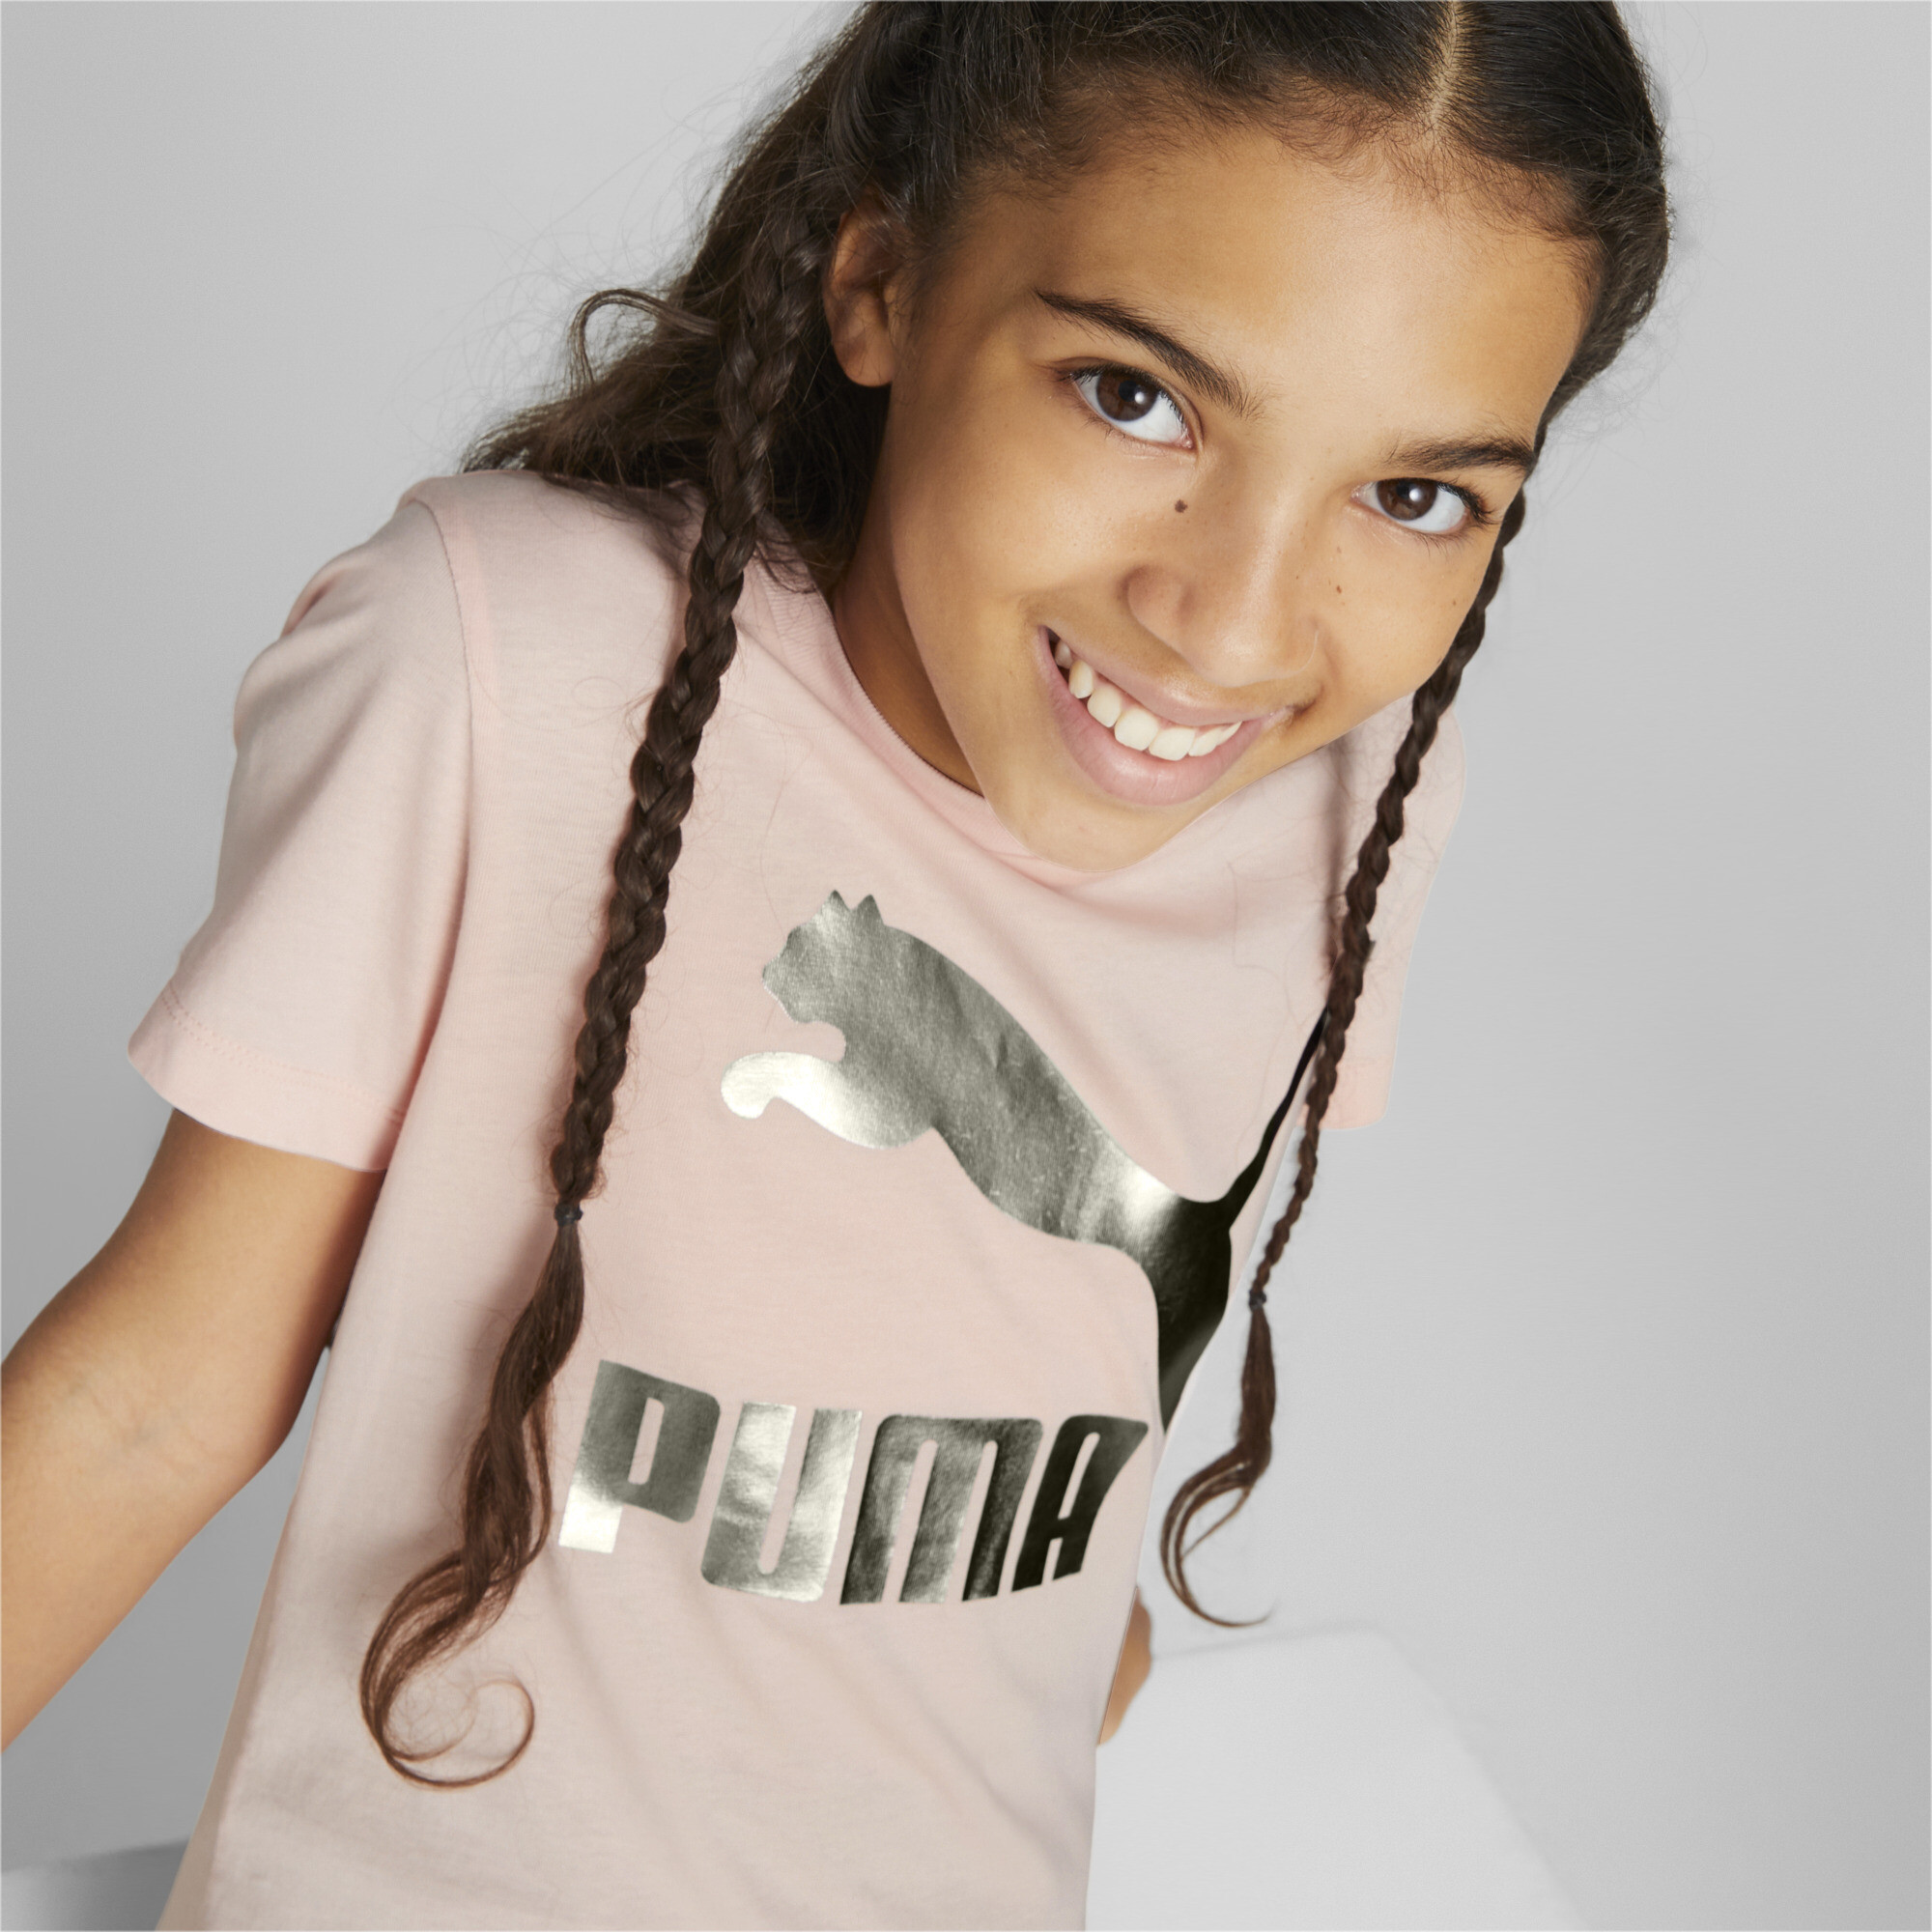 PUMA Classics Logo T-Shirt In Pink, Size 9-10 Youth